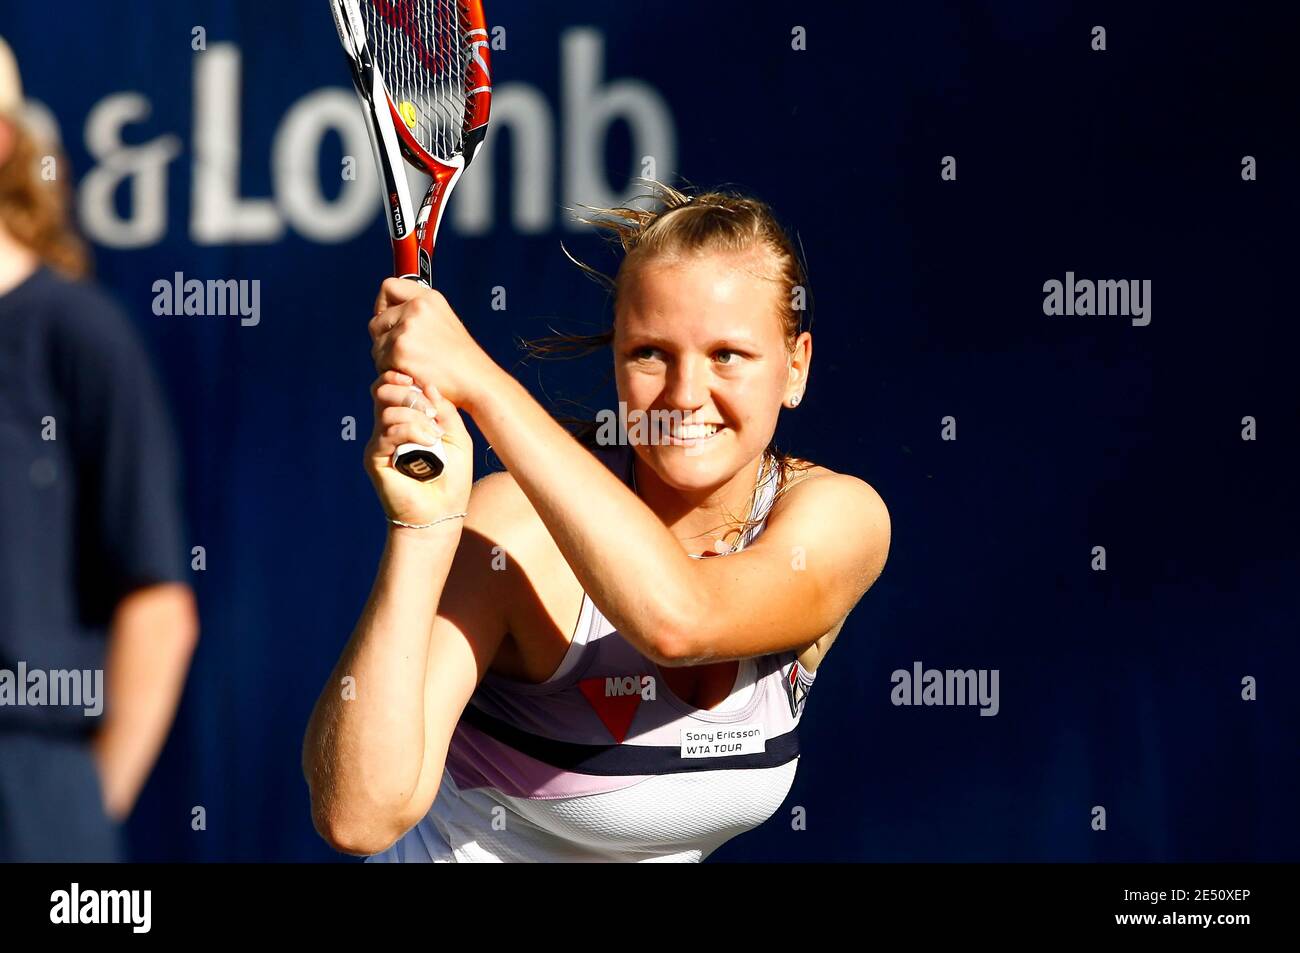 Hungary Agnes Szavay in action during her 2008 Bausch & Lomb Tennis Championships Quarterfinal match against USA's Lindsay Davenport in Amelia Island, FL, USA on April 11. 2008. Davenport defeated Szavay 6-4, 7-6. Photo by Gray Quetti/Cal Sport Media/Cameleon/ABACAPRESS.COM (Pictured : Agnes Szavay) Stock Photo